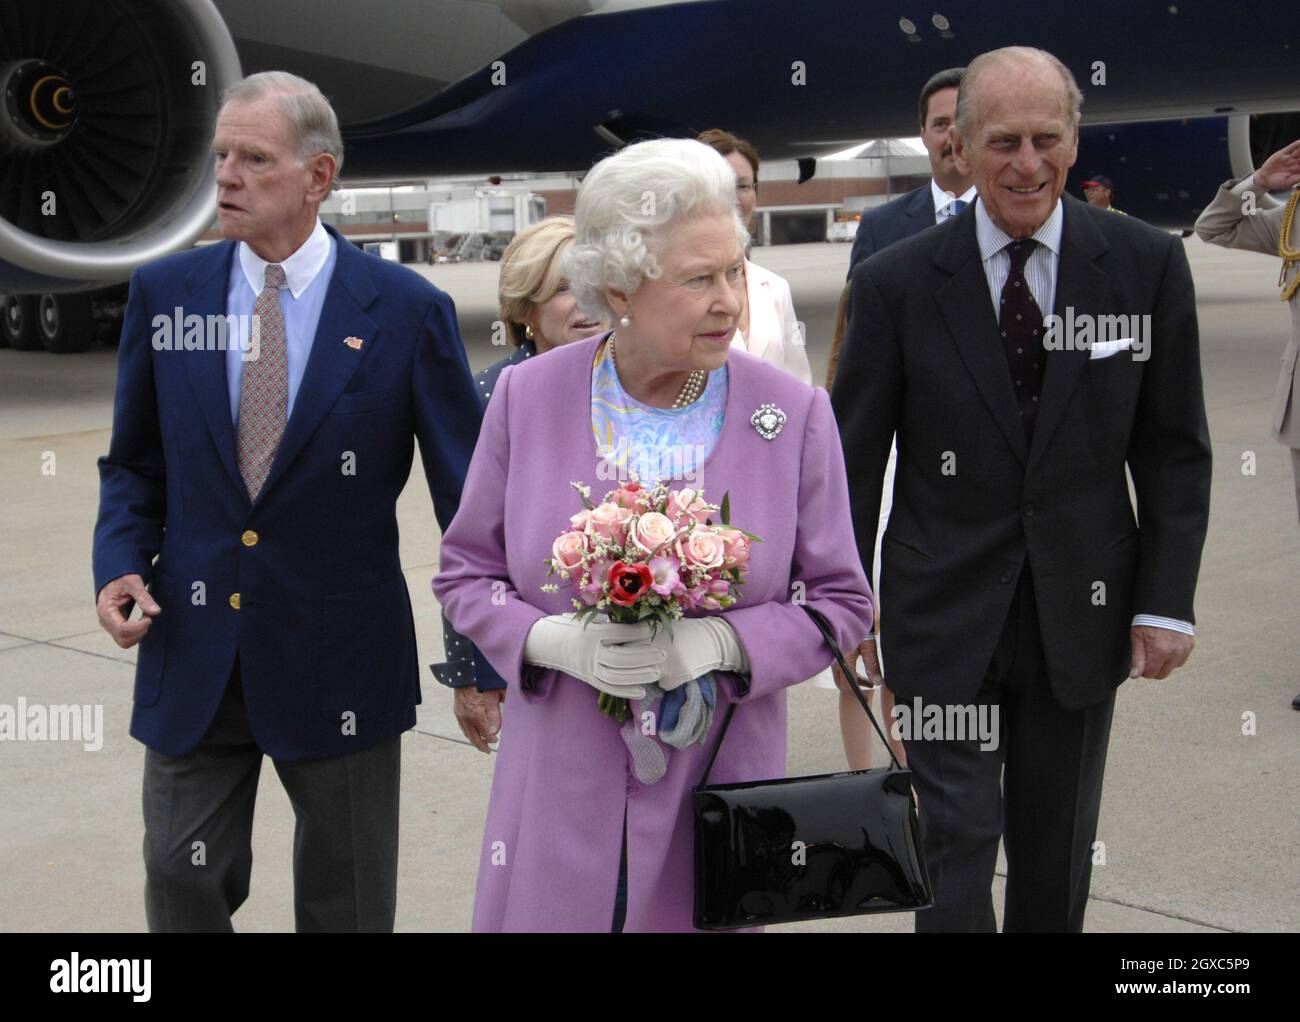 Queen Elizabeth ll and Prince Philip, Duke of Edinburgh are greeted by William and Sarah Farrish, their hosts for the weekend at Lexington, Kentucky on May 4, 2007. Stock Photo